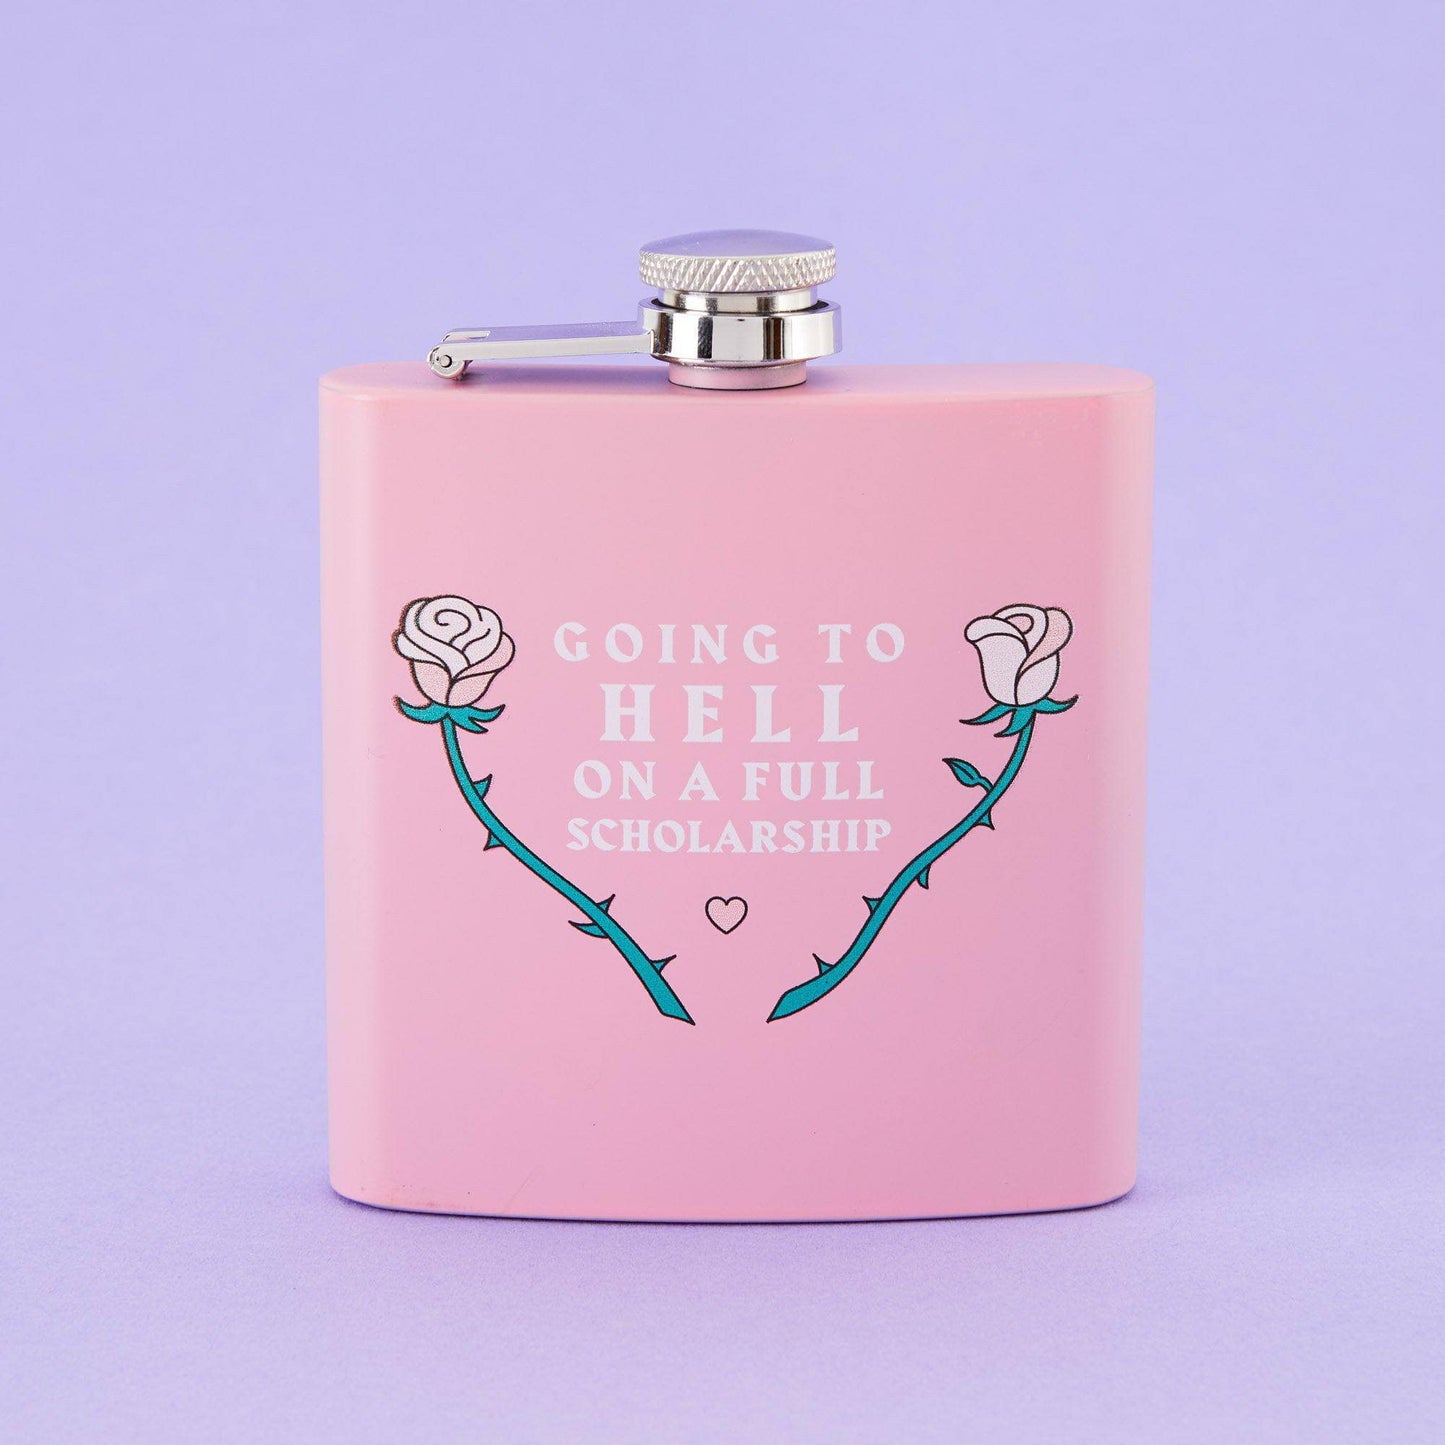 Going To Hell Hip Flask - Light Pink